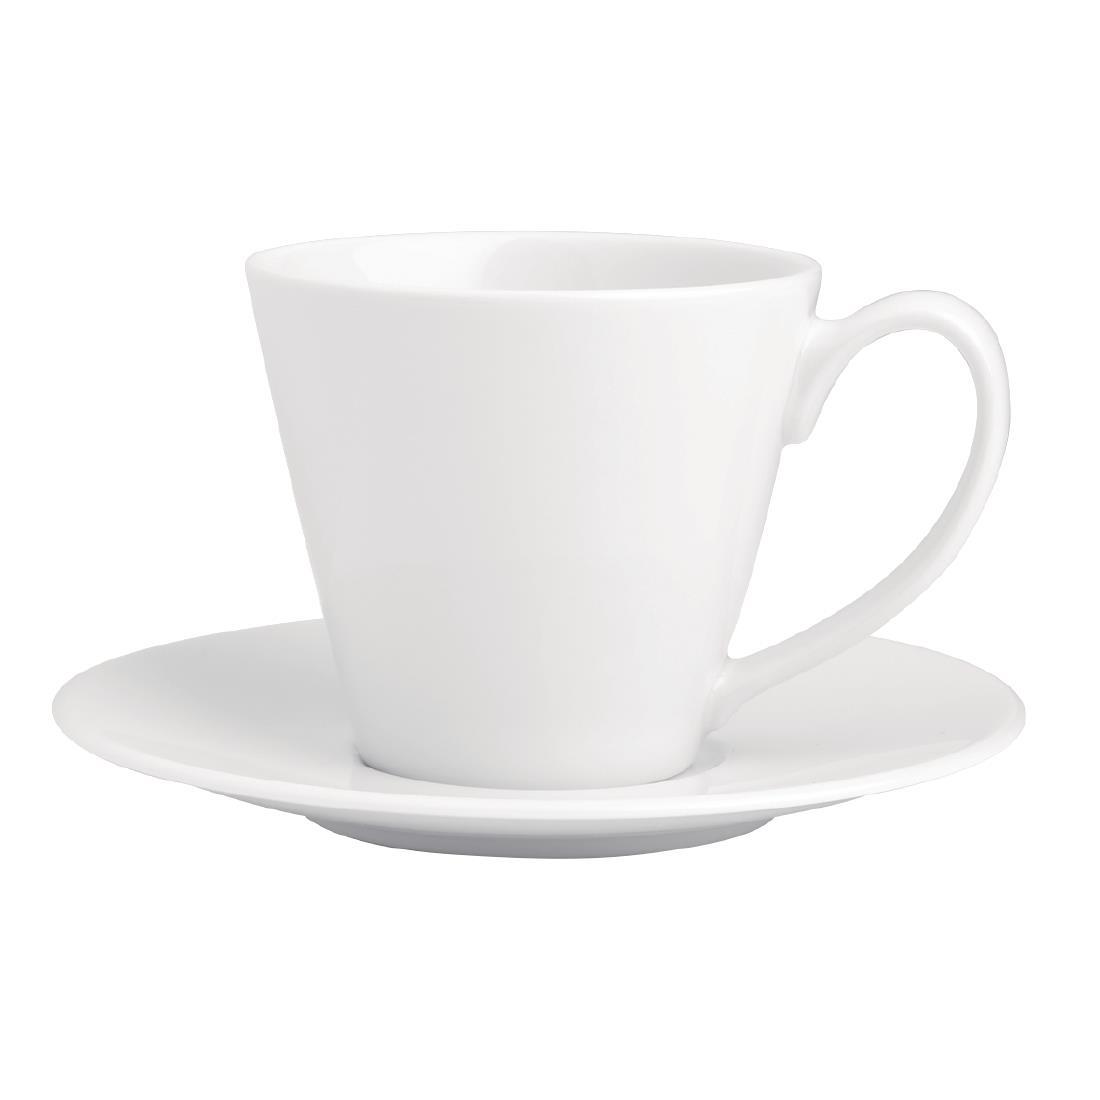 Royal Porcelain Classic White Tea Cup 210ml (Pack of 12) - GT927  - 3